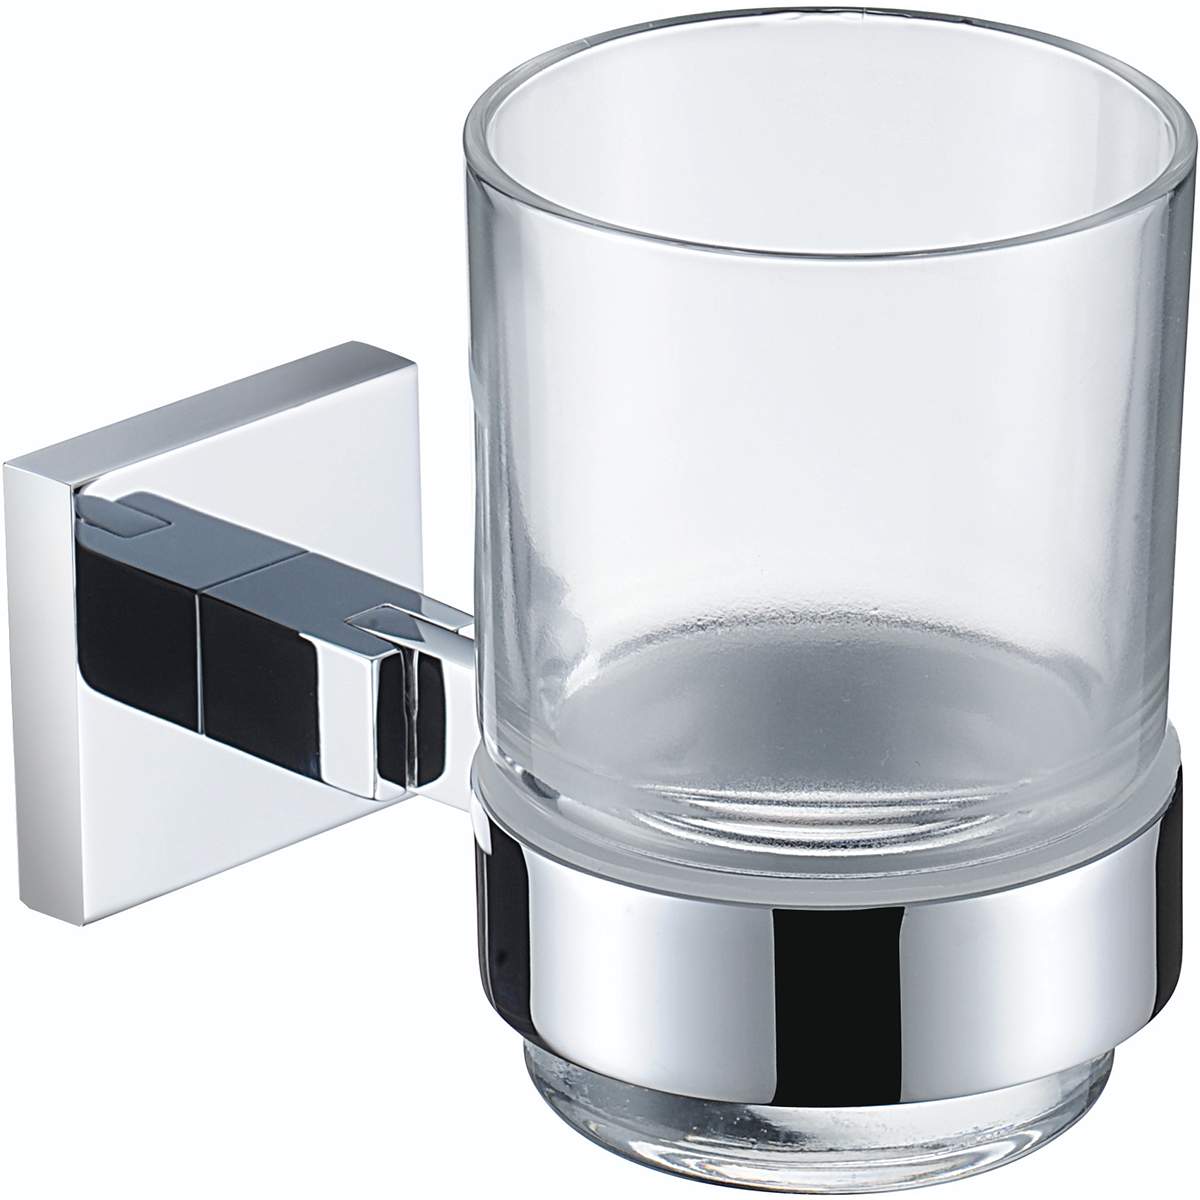 Bristan Tumbler and Holder (SQ HOLD C)